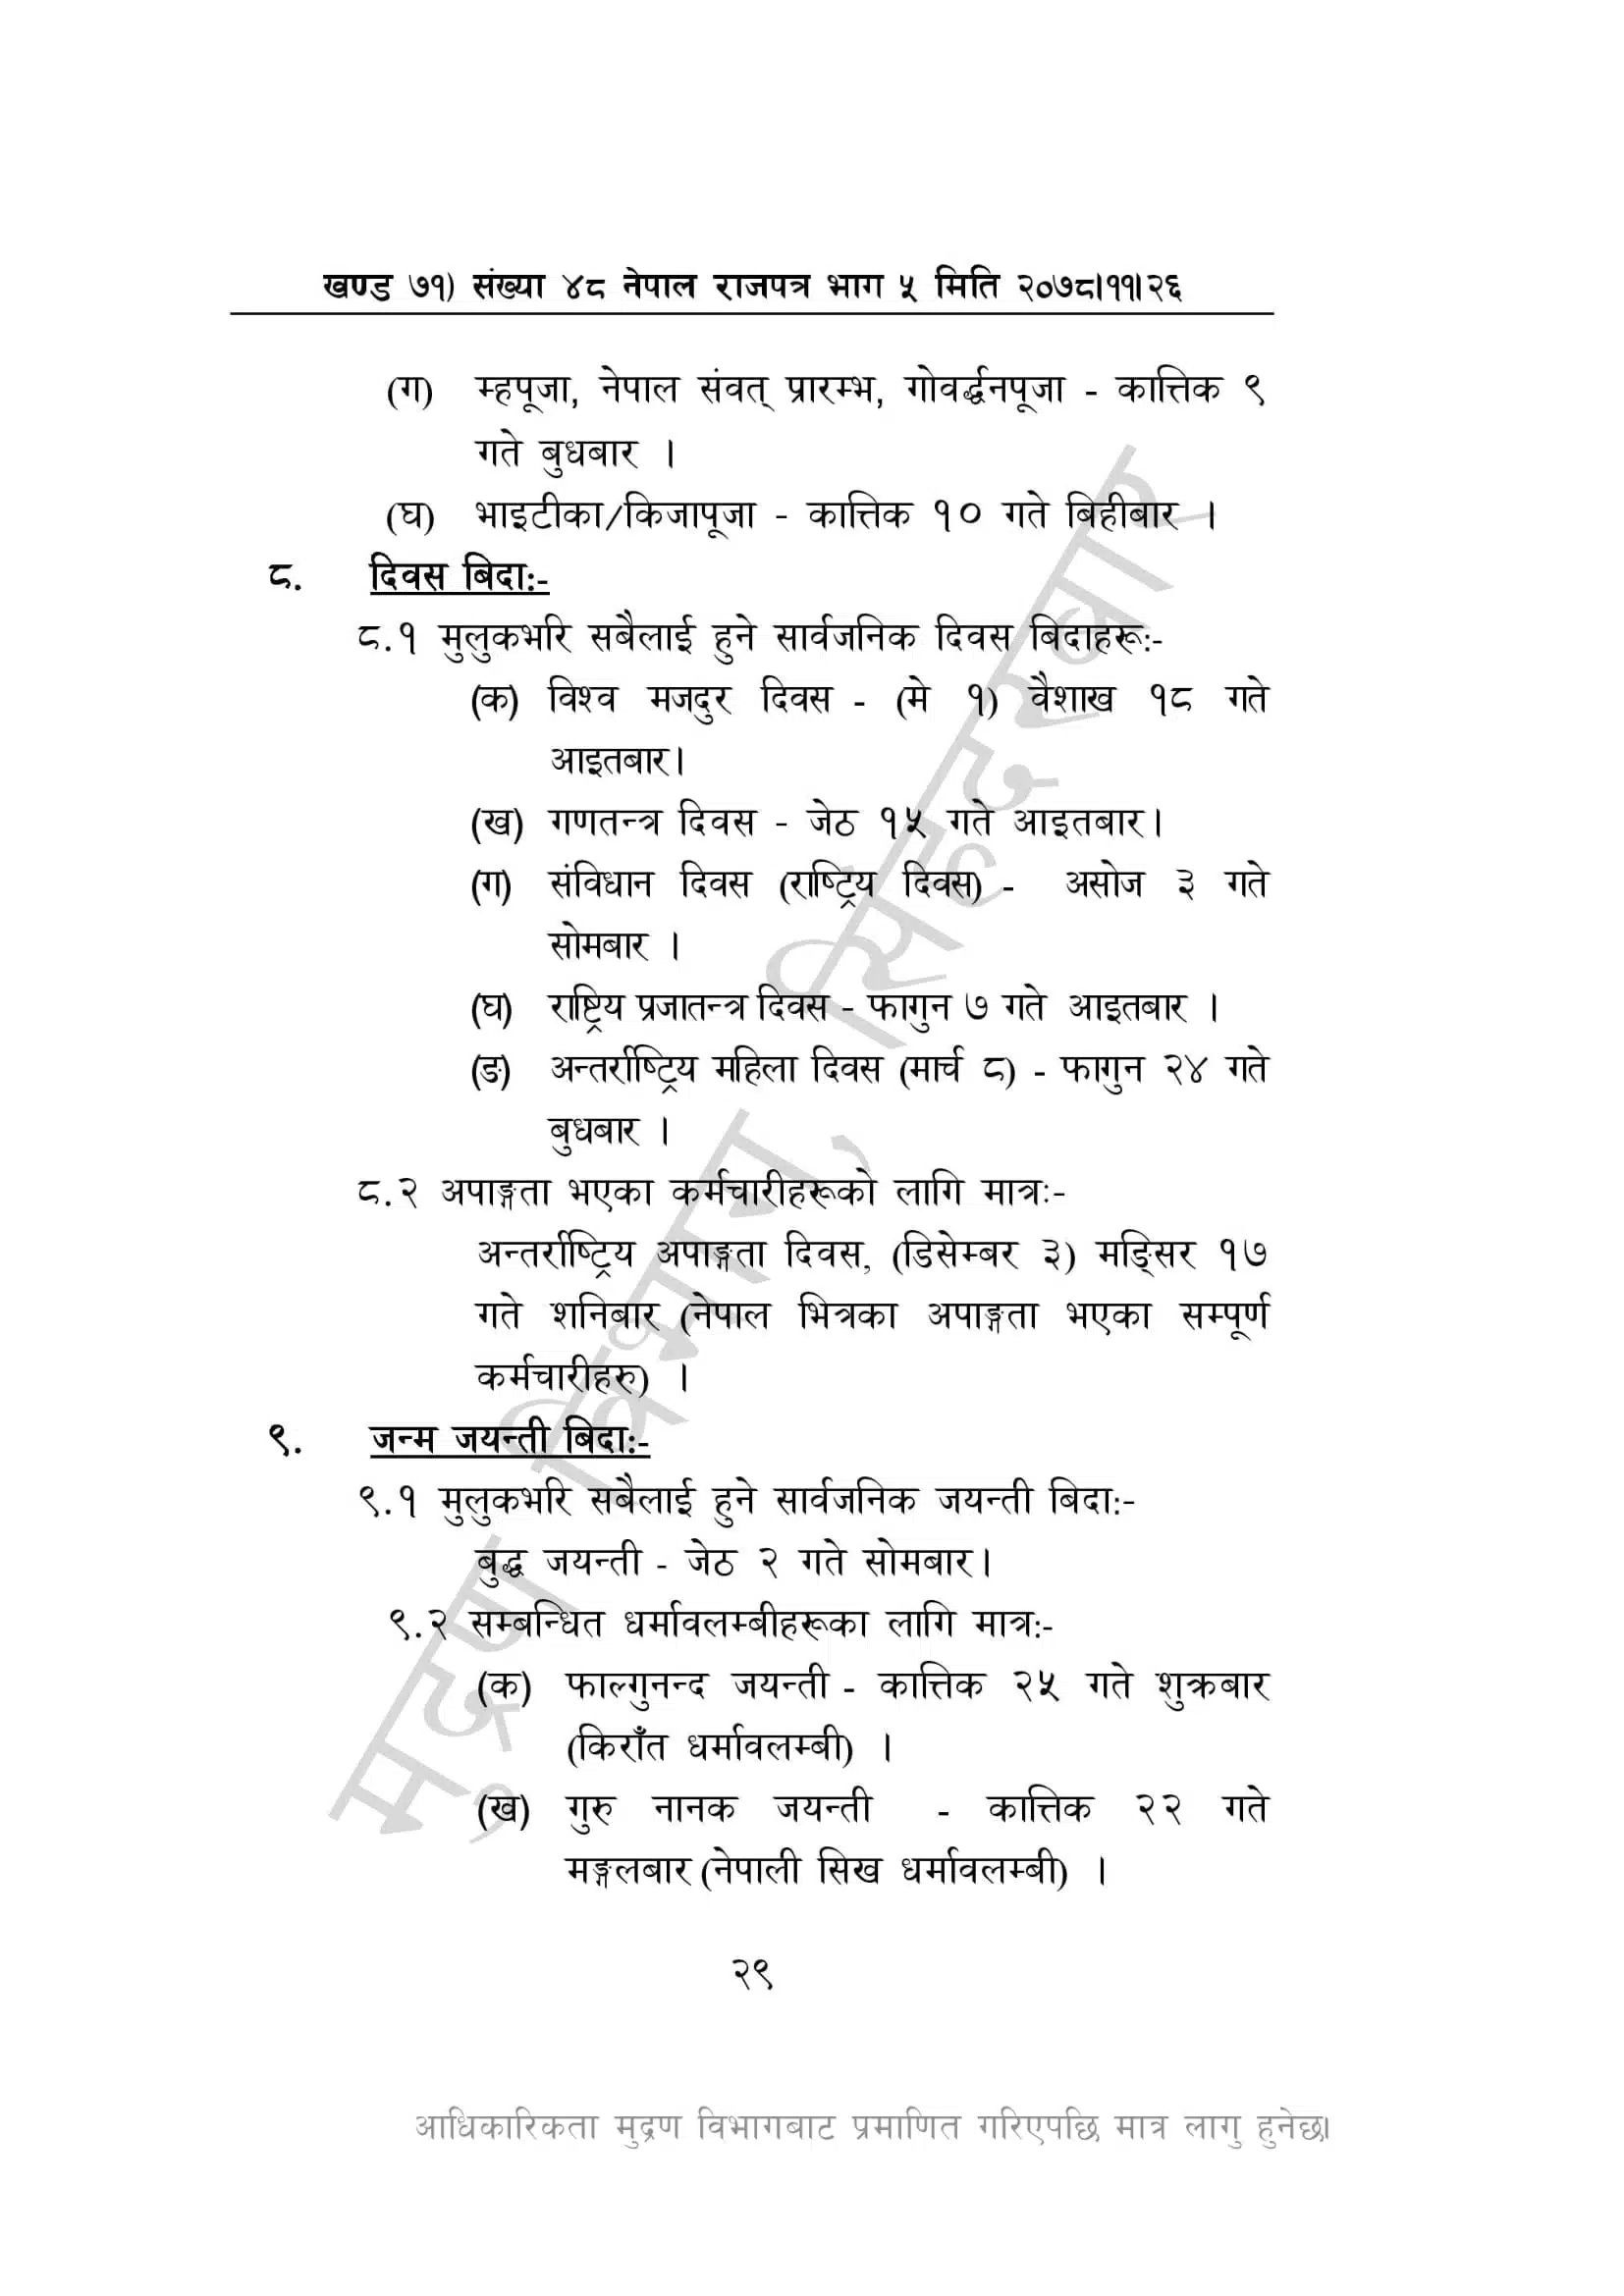 list of public holidays in nepal 2079